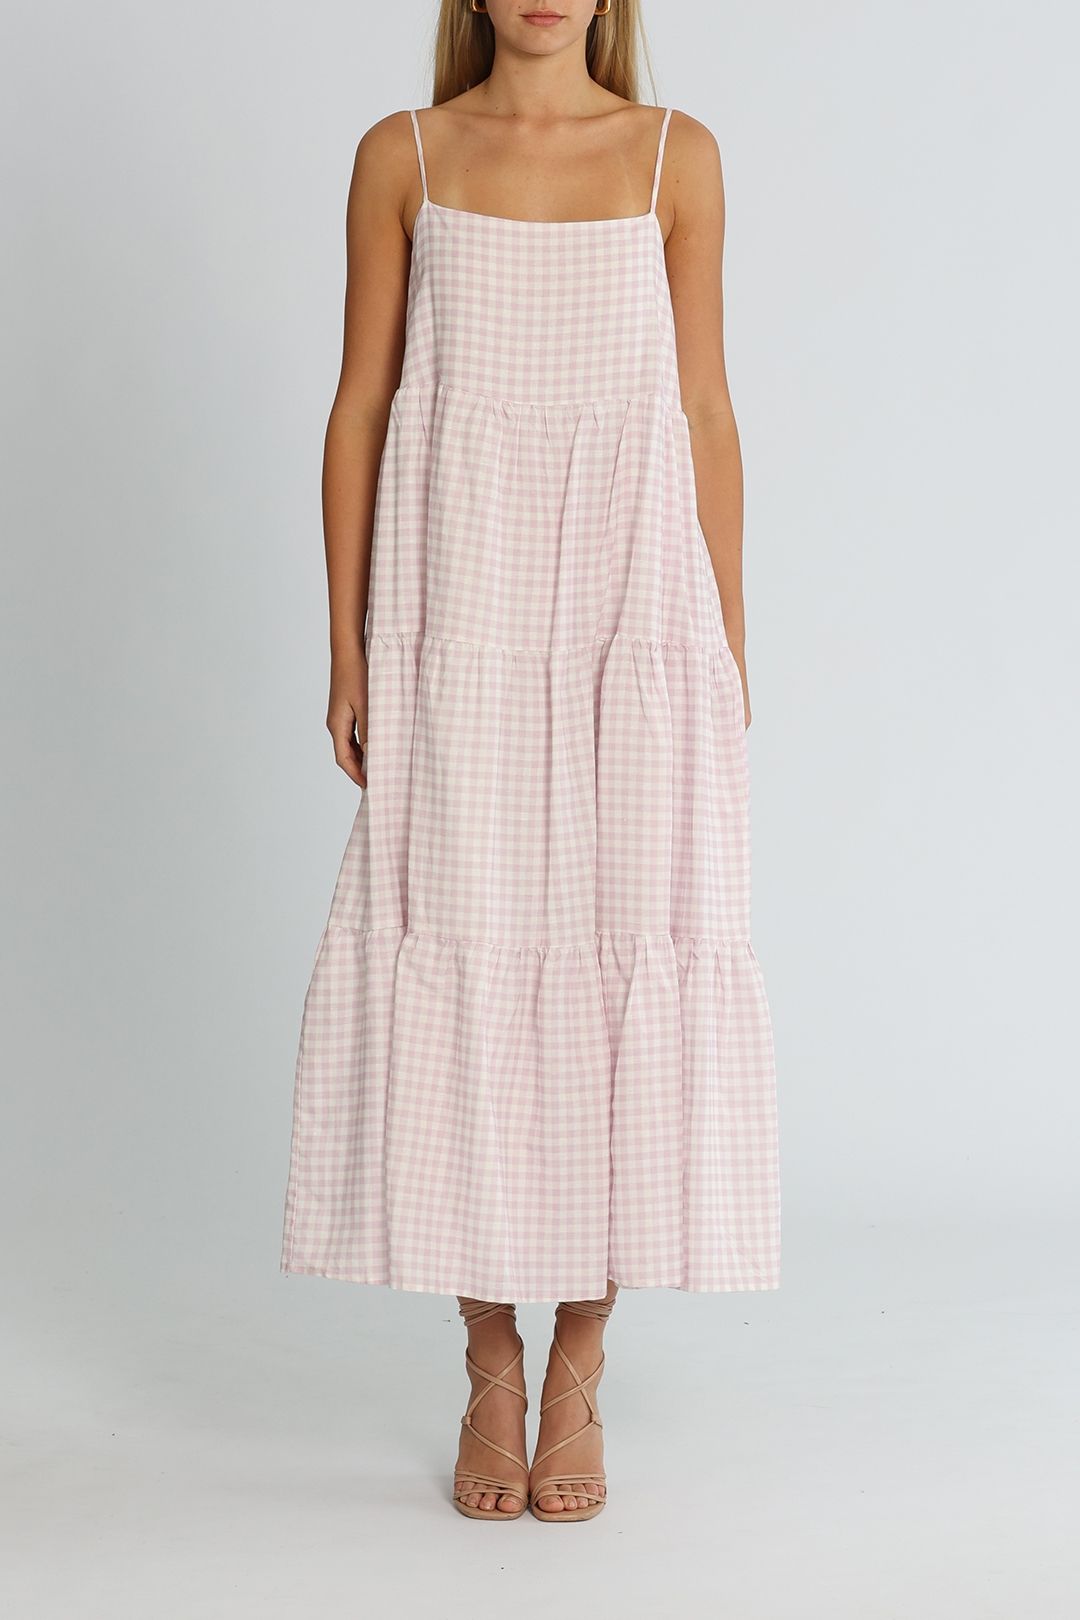 Charlie Holiday The Isabella Maxi Dress Lilac White Gingham